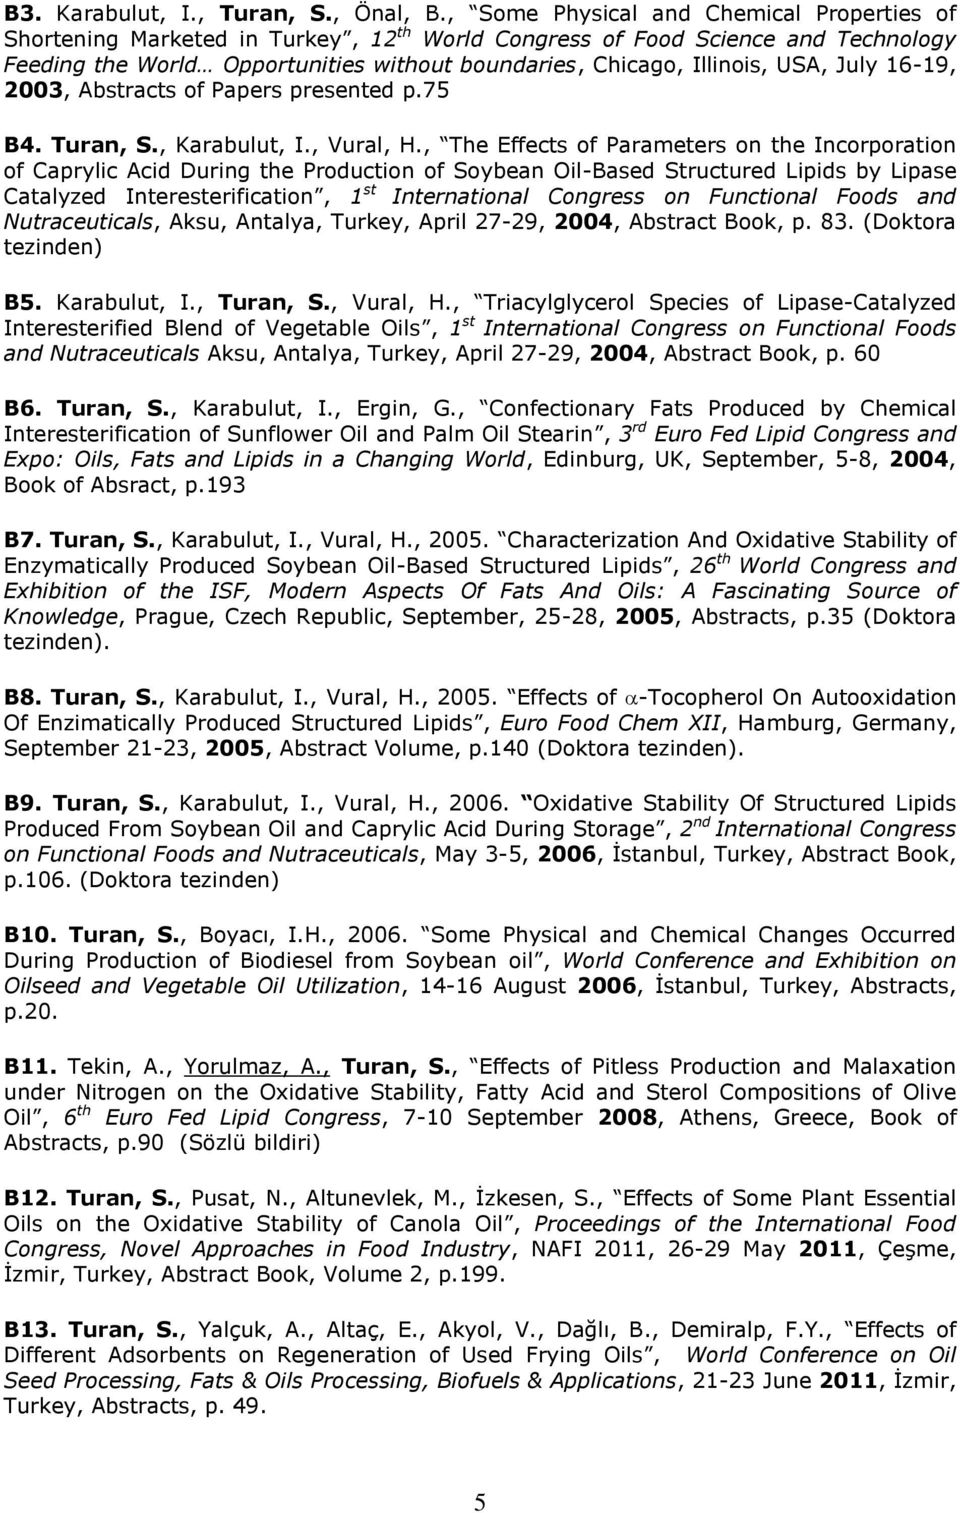 USA, July 16-19, 2003, Abstracts of Papers presented p.75 B4. Turan, S., Karabulut, I., Vural, H.